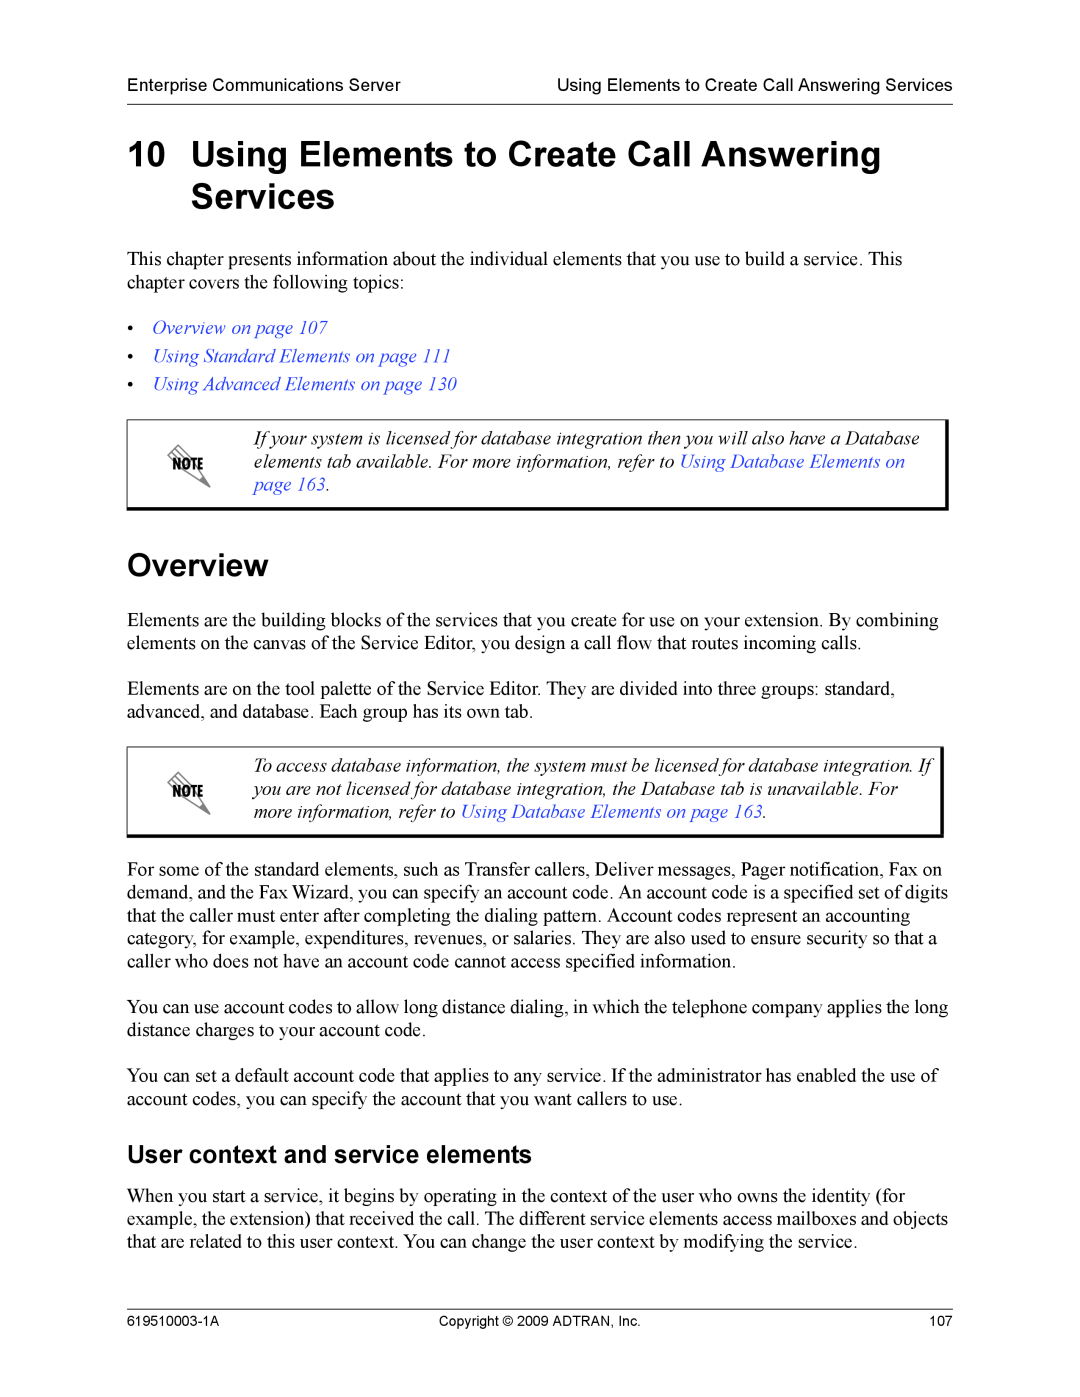 ADTRAN 619510003-1A manual Using Elements to Create Call Answering Services, User context and service elements, Overview 